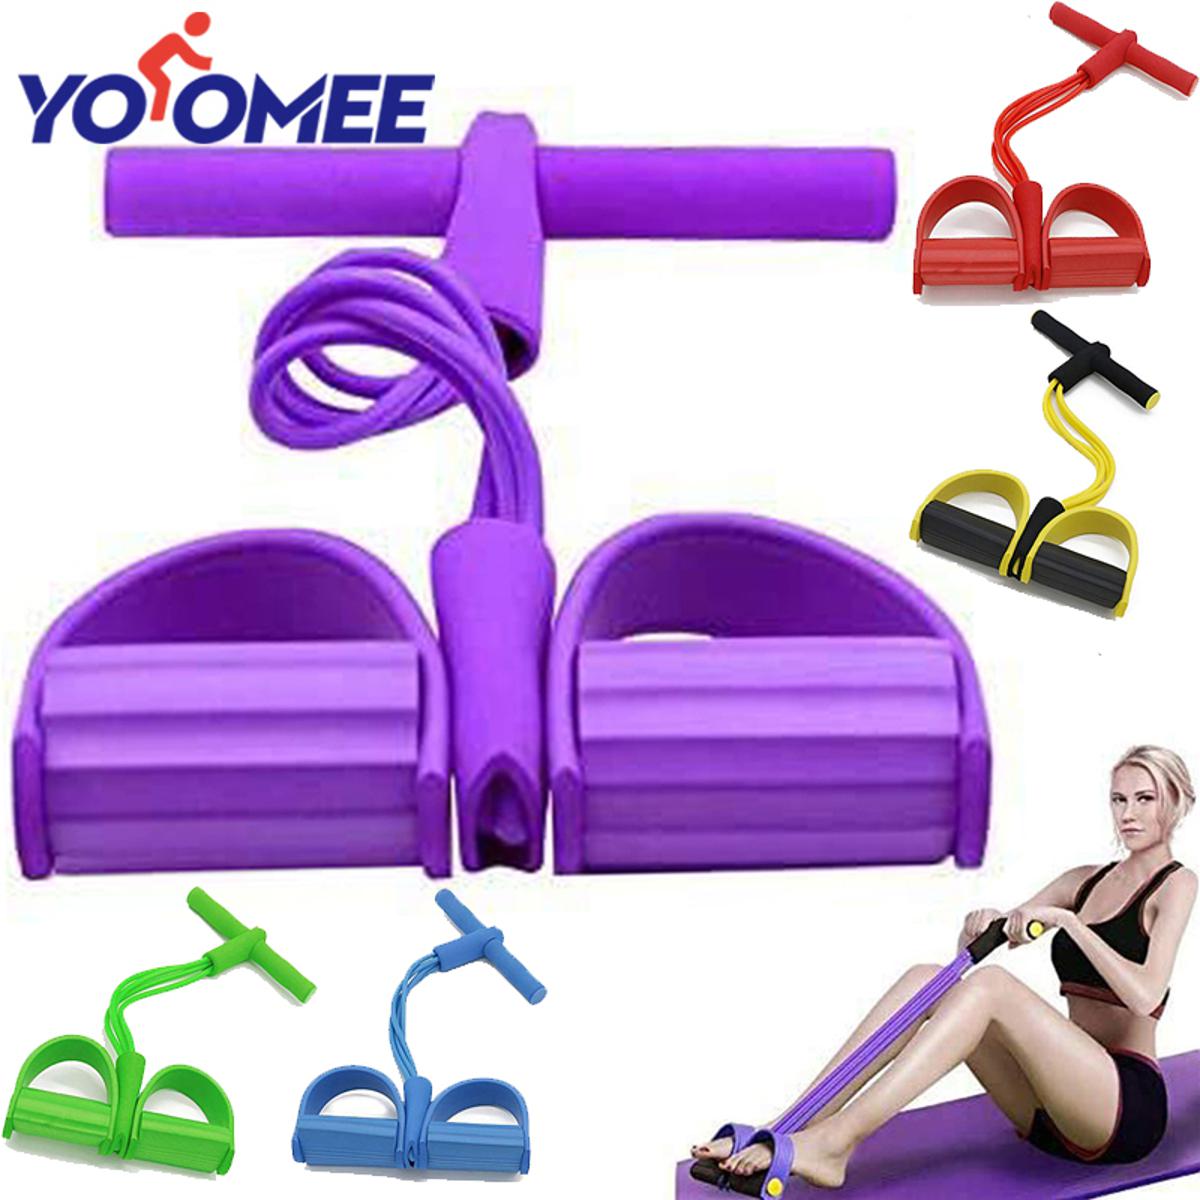 Yoomee Pedal Resistance Band Fitness Rally Foot Retractor Pedal Elastic Pedal  Puller Physical Therapy Strength Training Yoga Equipment